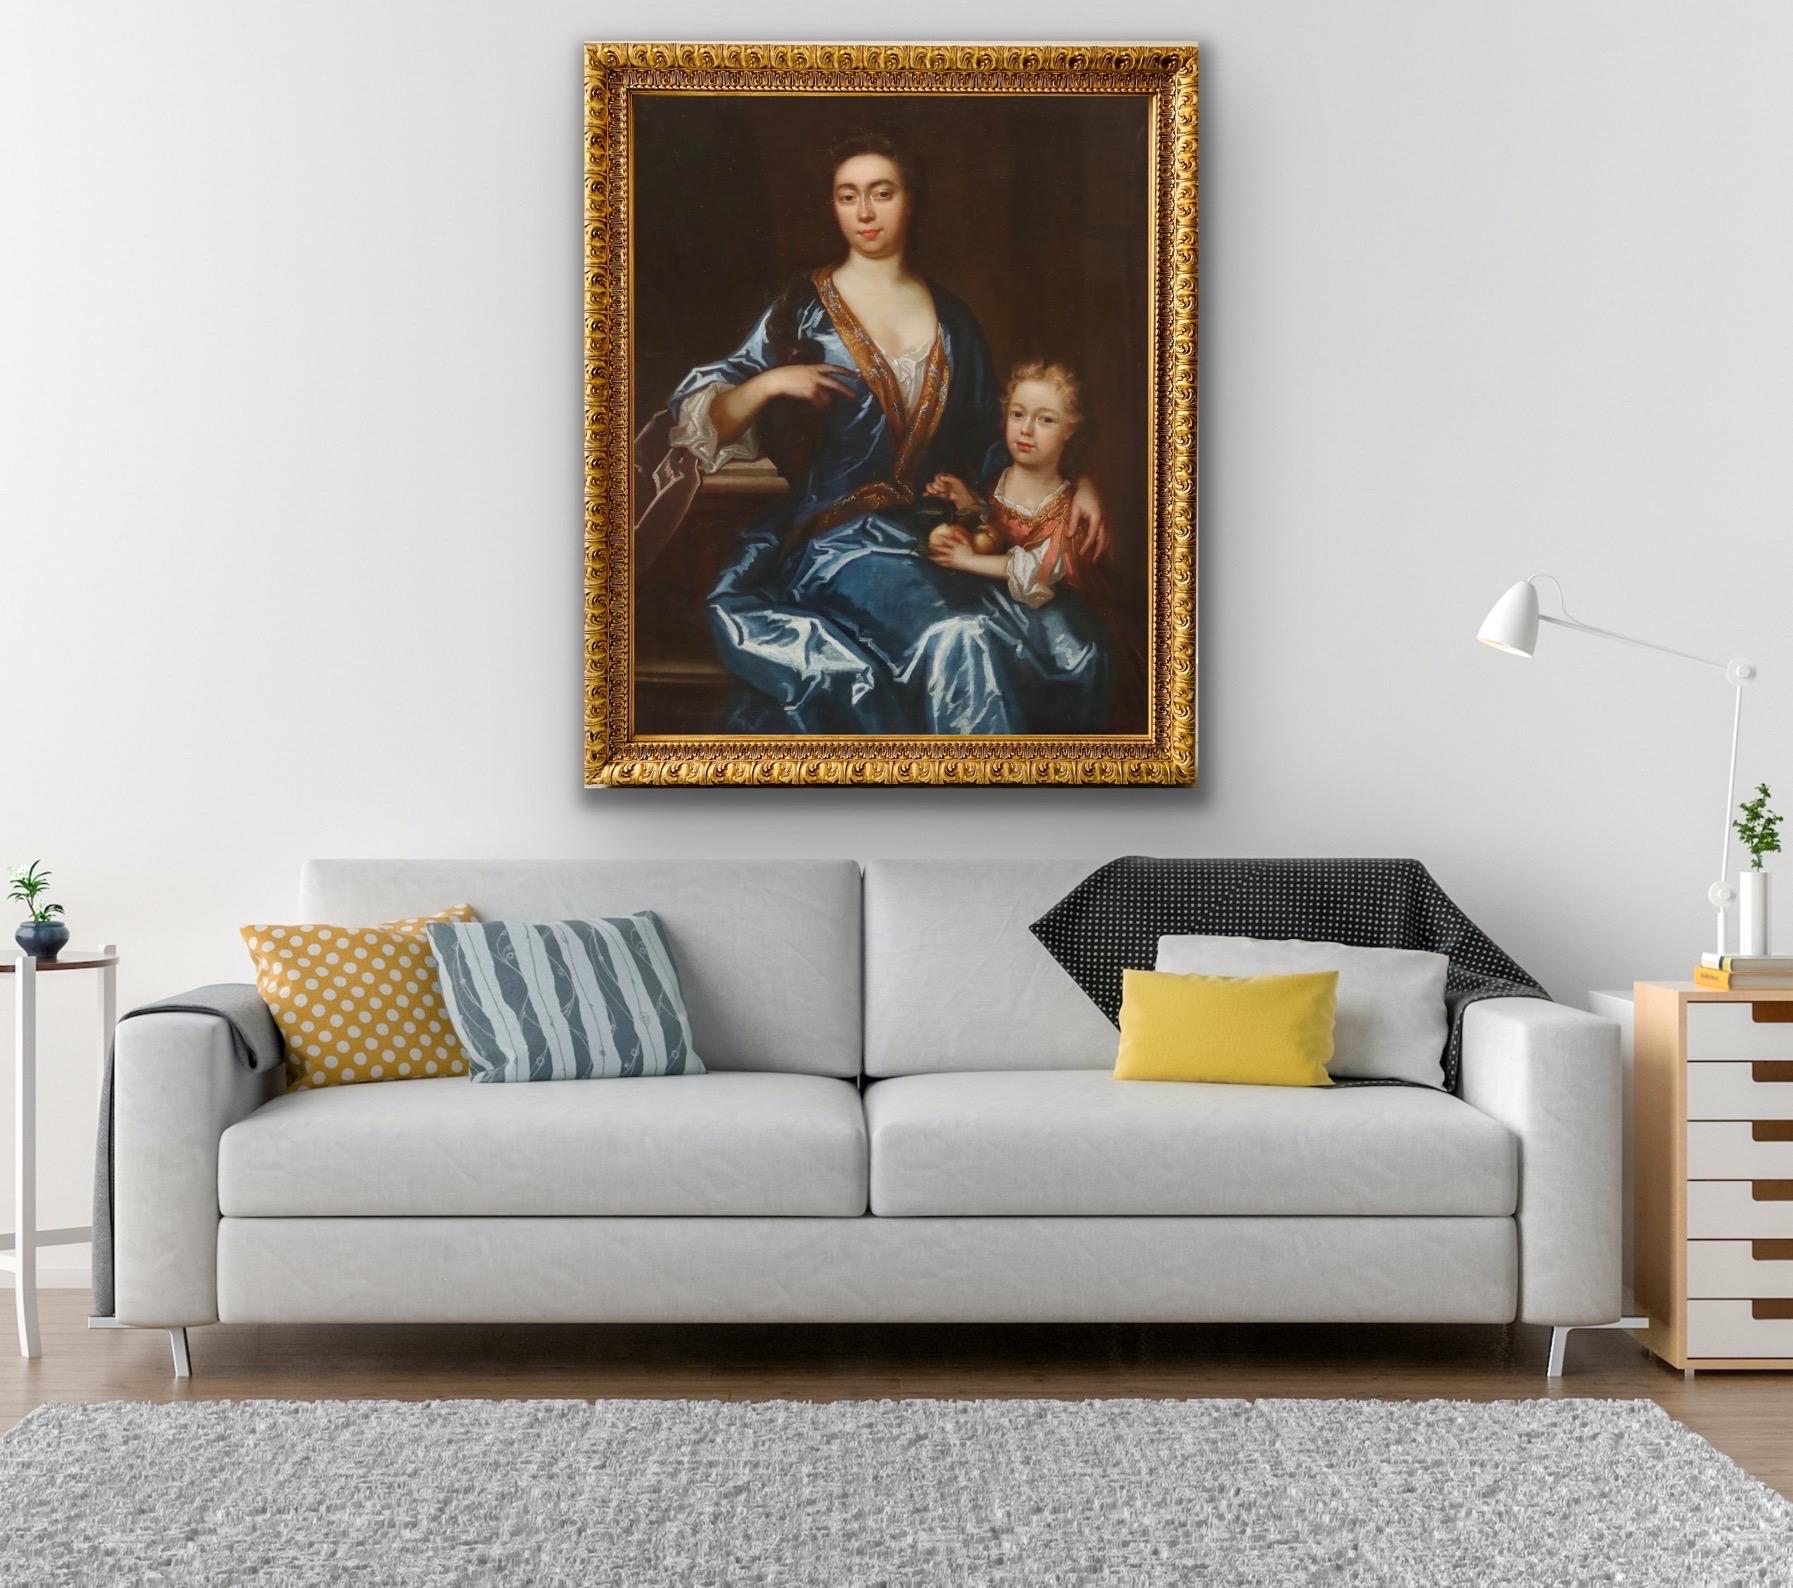 Huge 17th century English portrait of a mother and her son

The very fine and large portrait depicts a mother and her son The Lady is seated in an interior wearing a shimmering blue silk dress with a gilt brocade lining and is resting her arm on a